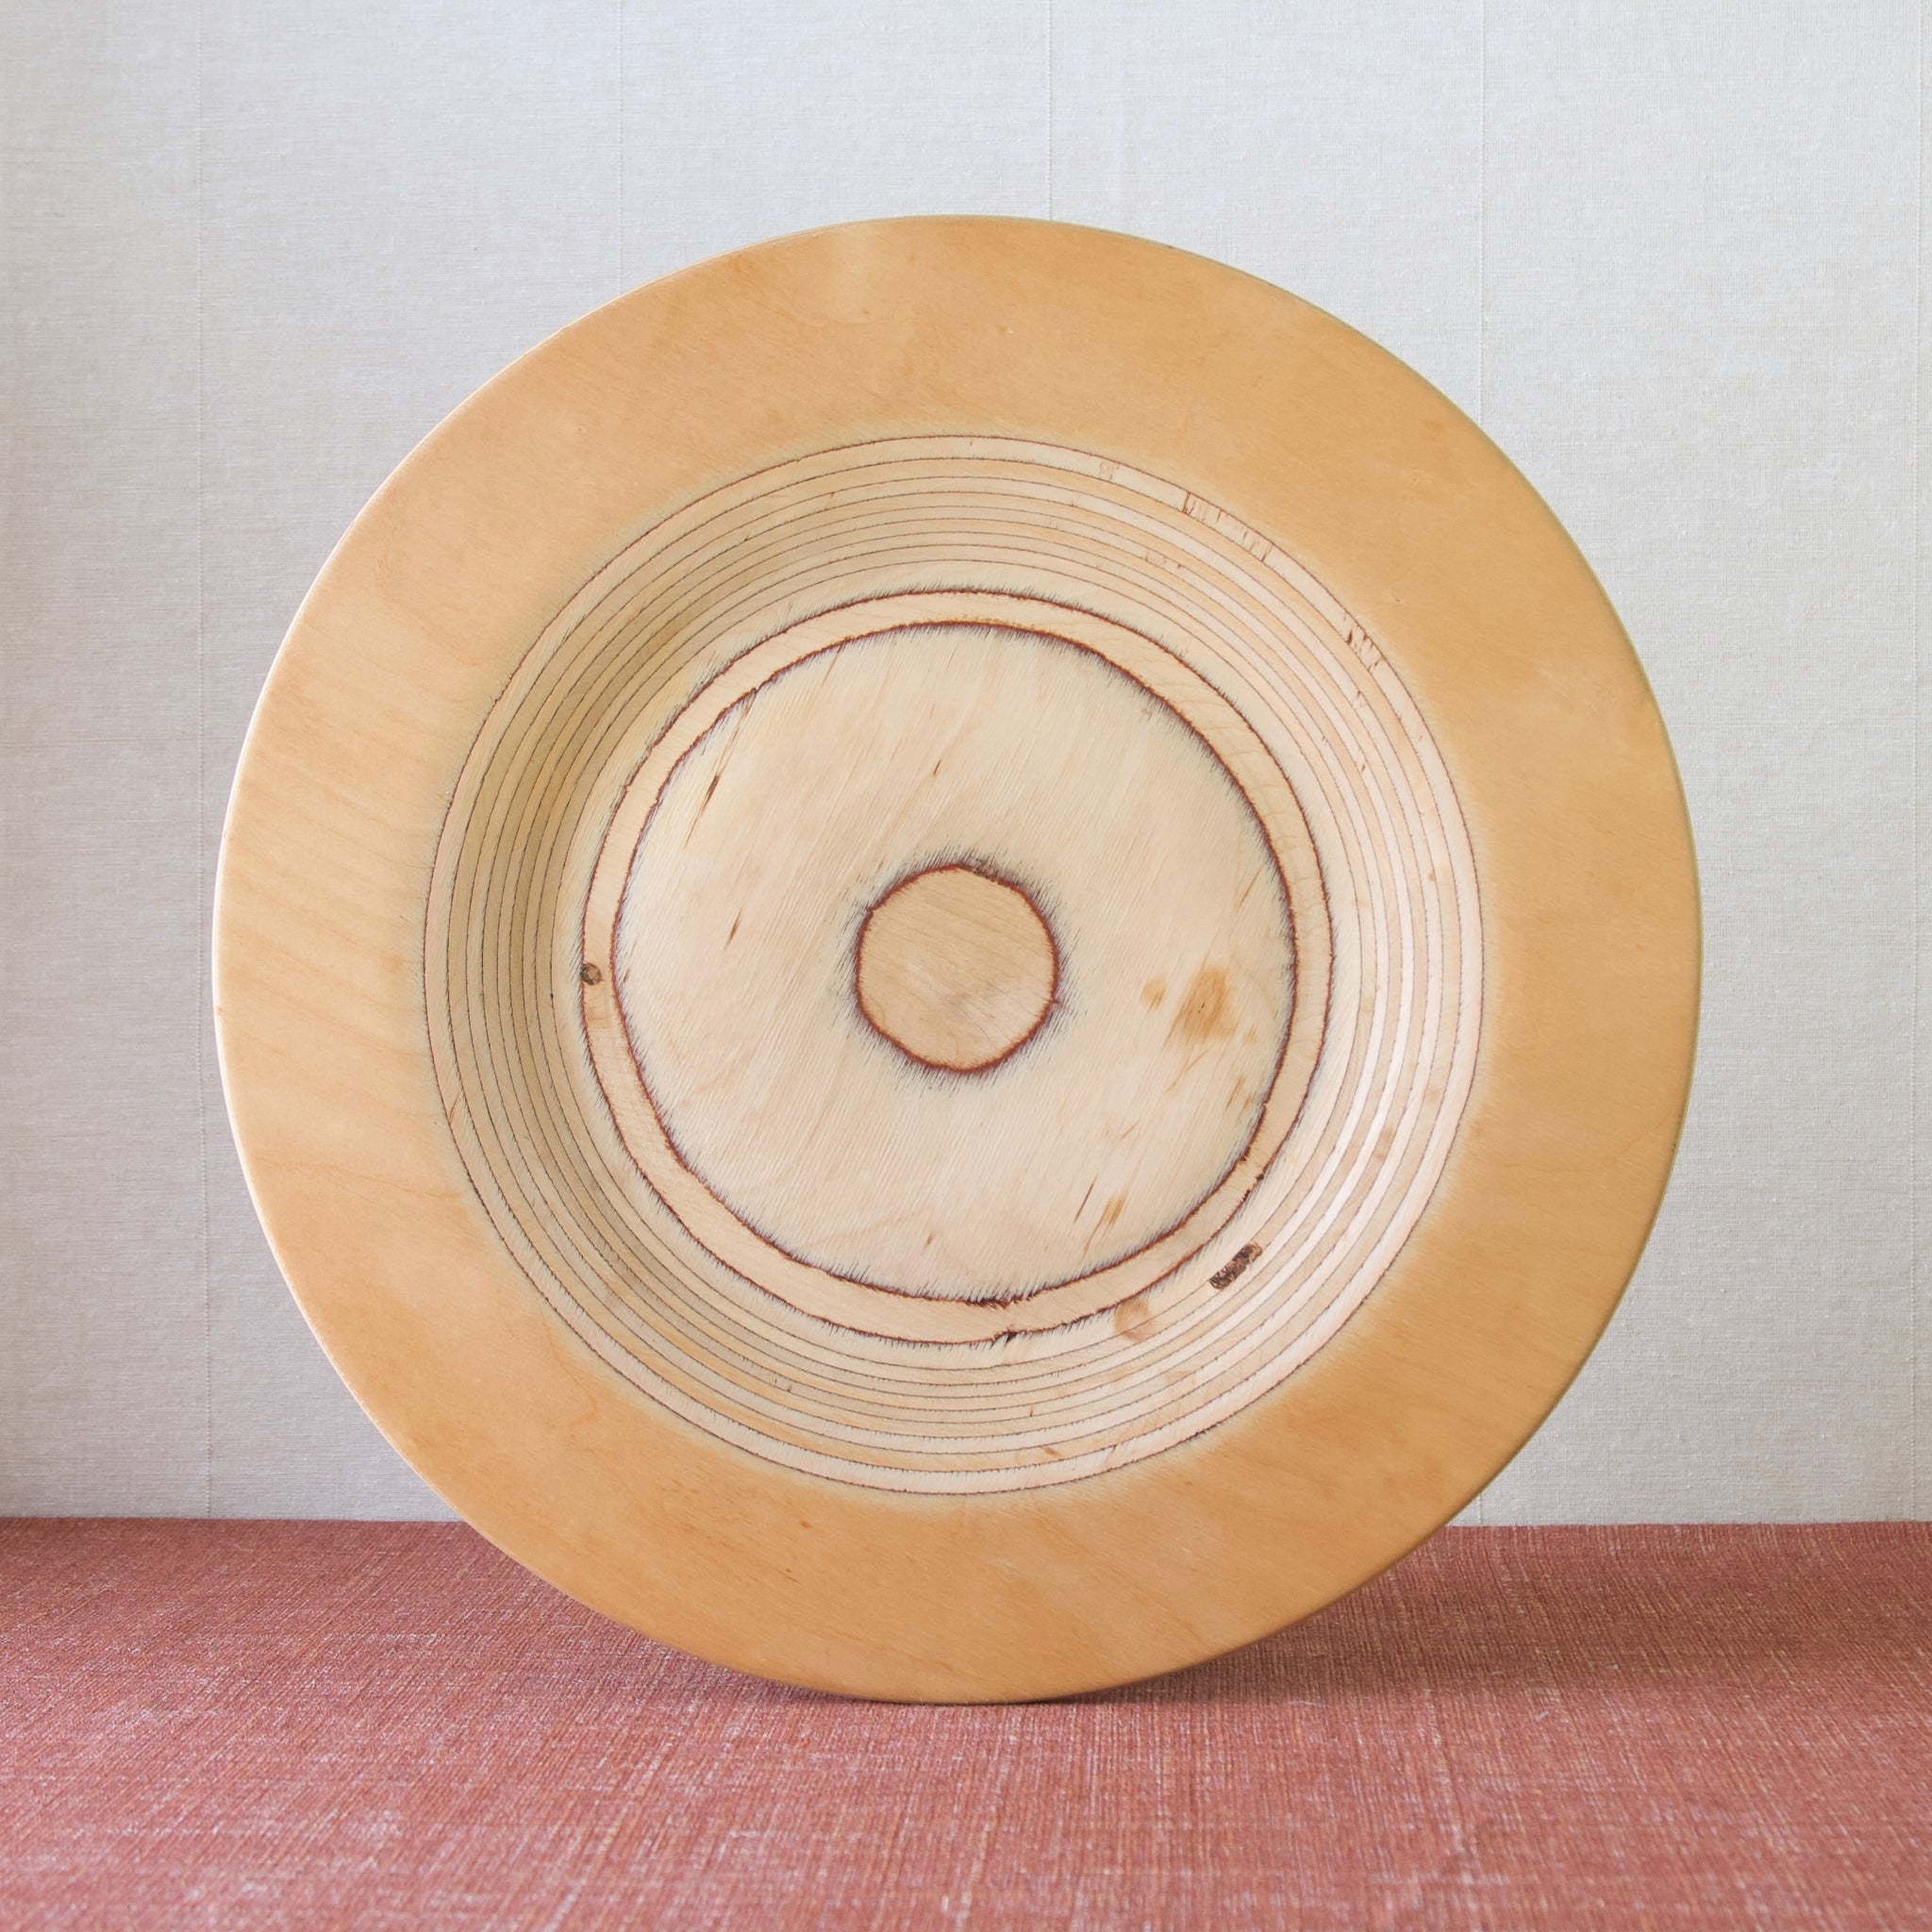 An exquisite golden yellow coloured MidCentury modern Birchwood serving platter, designed by the legendary Eero Saarinen. Elevate your dining experience with this Modernist plywood tray.